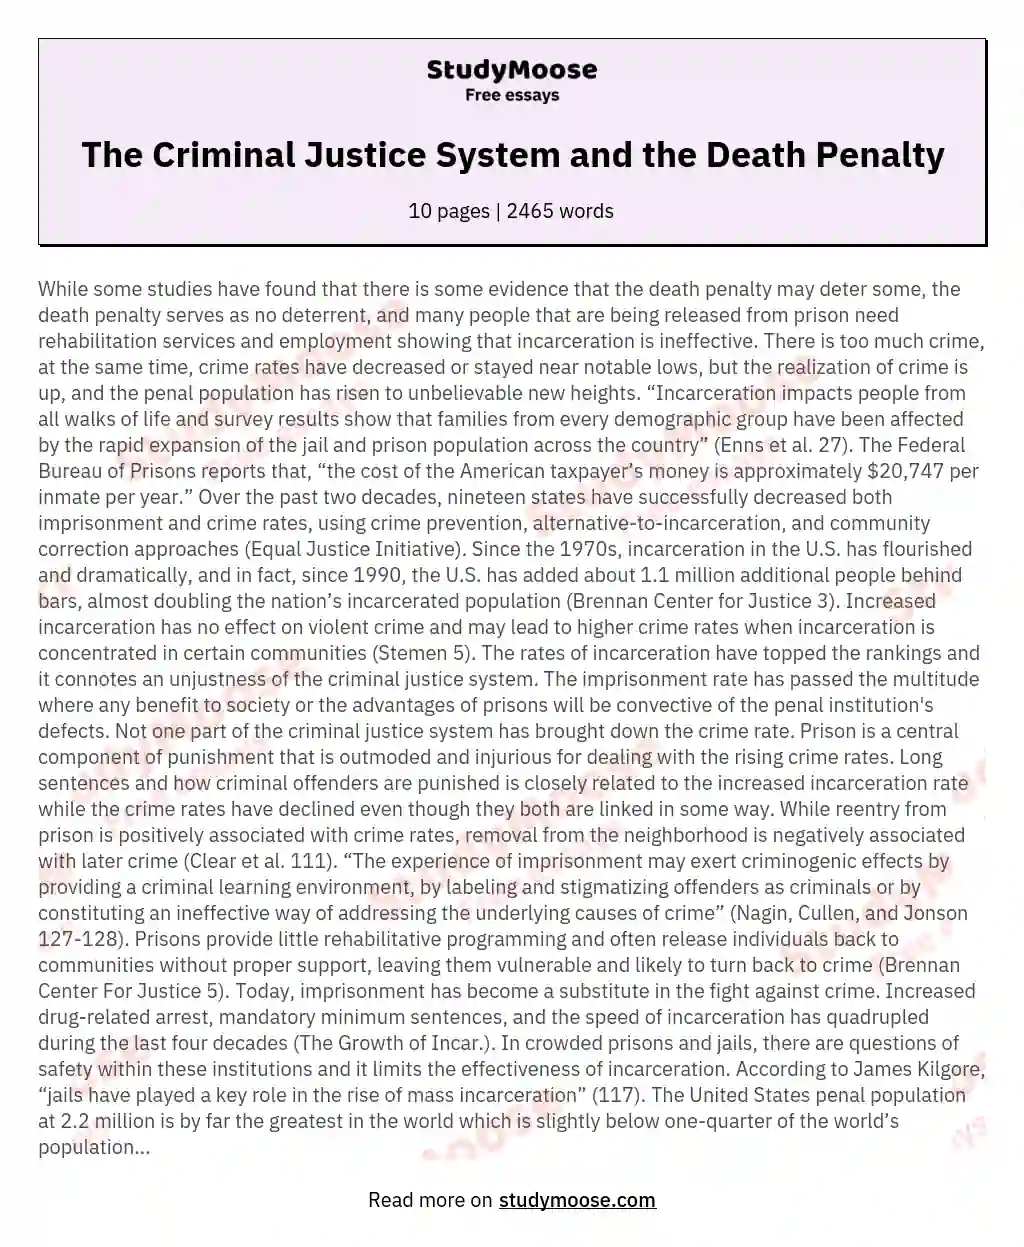 The Criminal Justice System and the Death Penalty